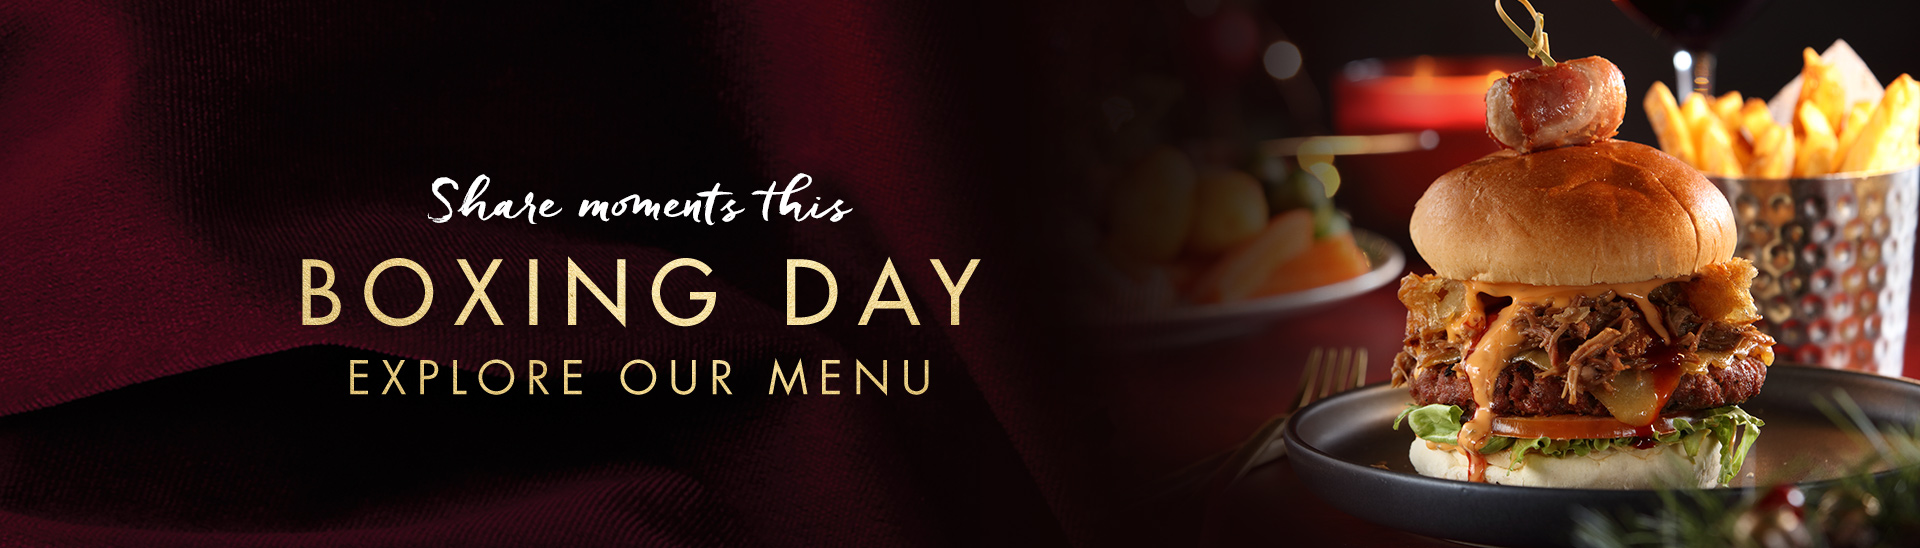 Boxing day menu at Miller & Carter Chigwell